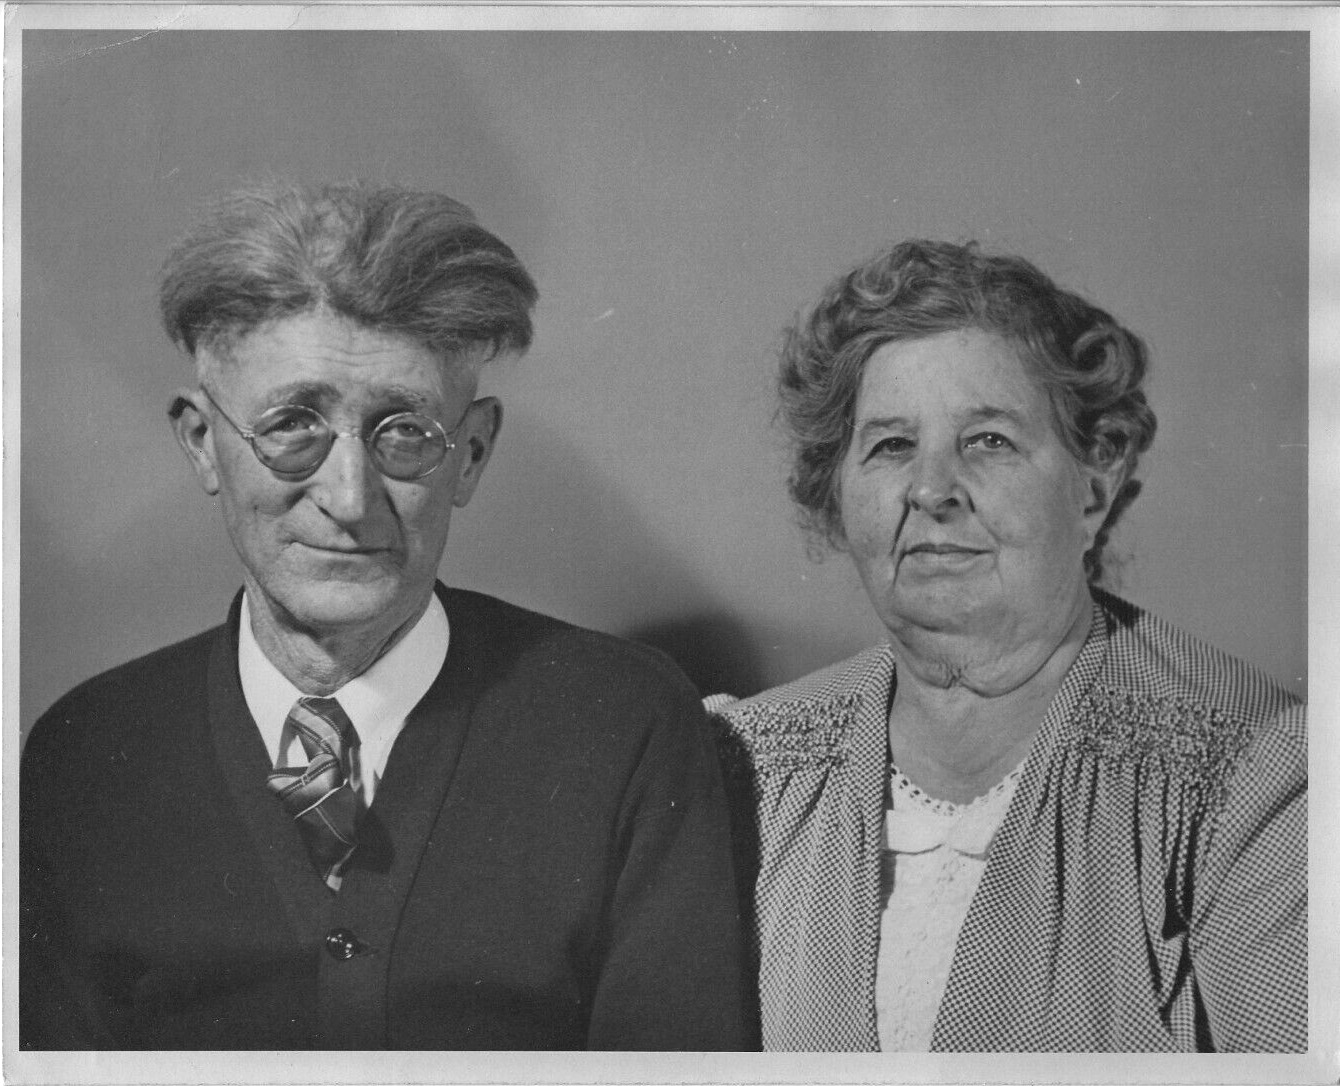 Vintage 8 x10 Black & White Photo Of An Odd Looking Couple 1940\'s - Unique Look